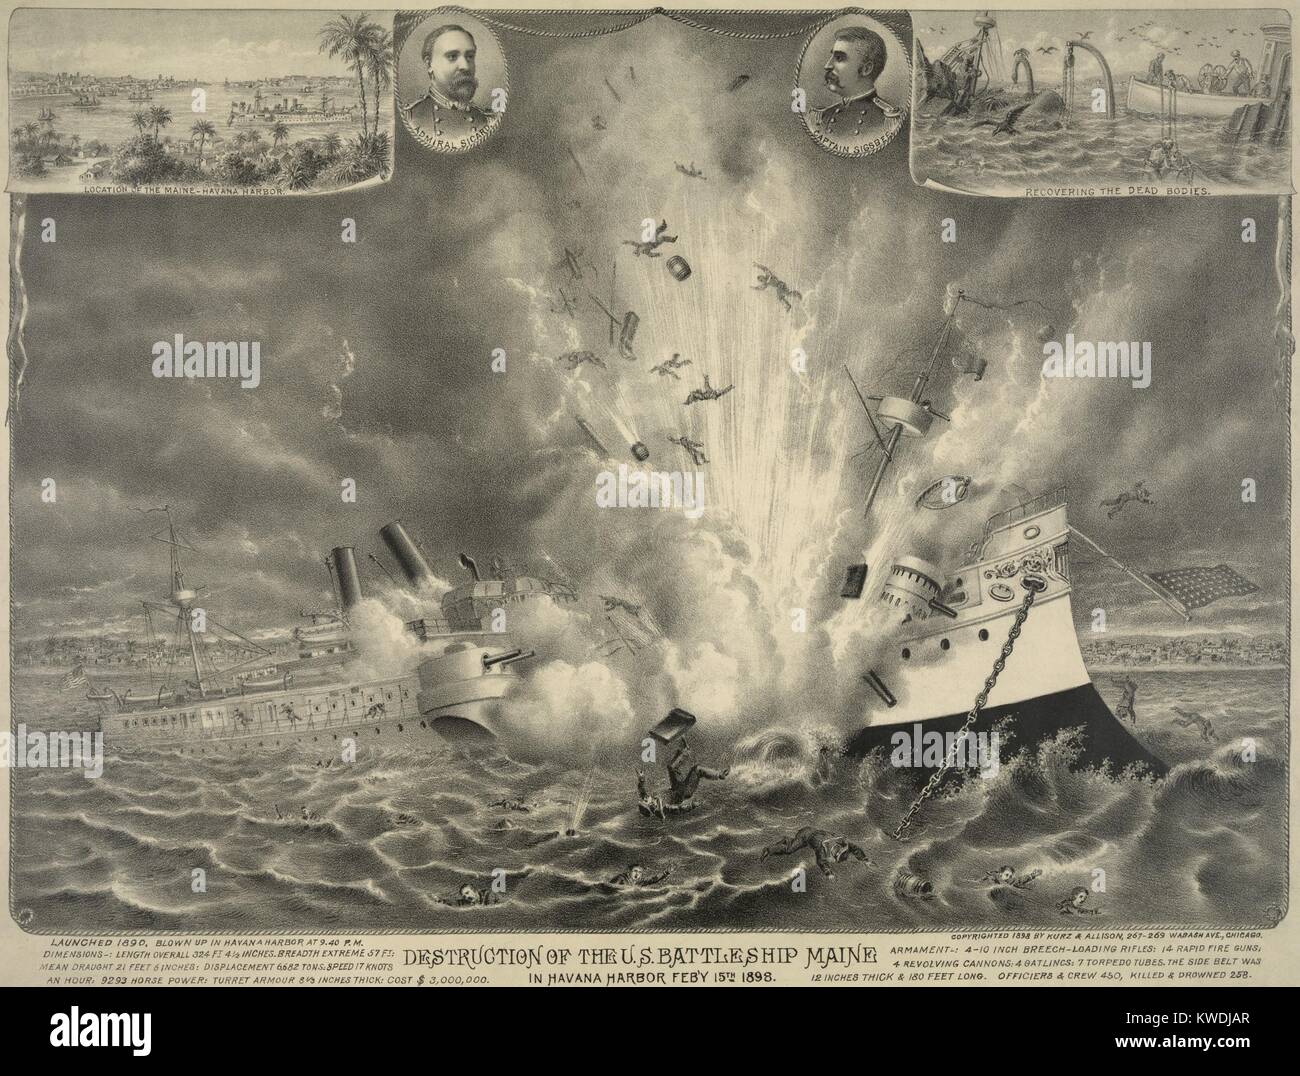 Destruction of the U.S. battleship Maine in Havana Harbor Feb. 15, 1898. At top are inserted images: General view of the Maine anchored in Havana Harbor; portraits of Admiral Sicard and Captain Sigsbee; and recovering the dead sailors bodies (BSLOC 2017 10 12) Stock Photo